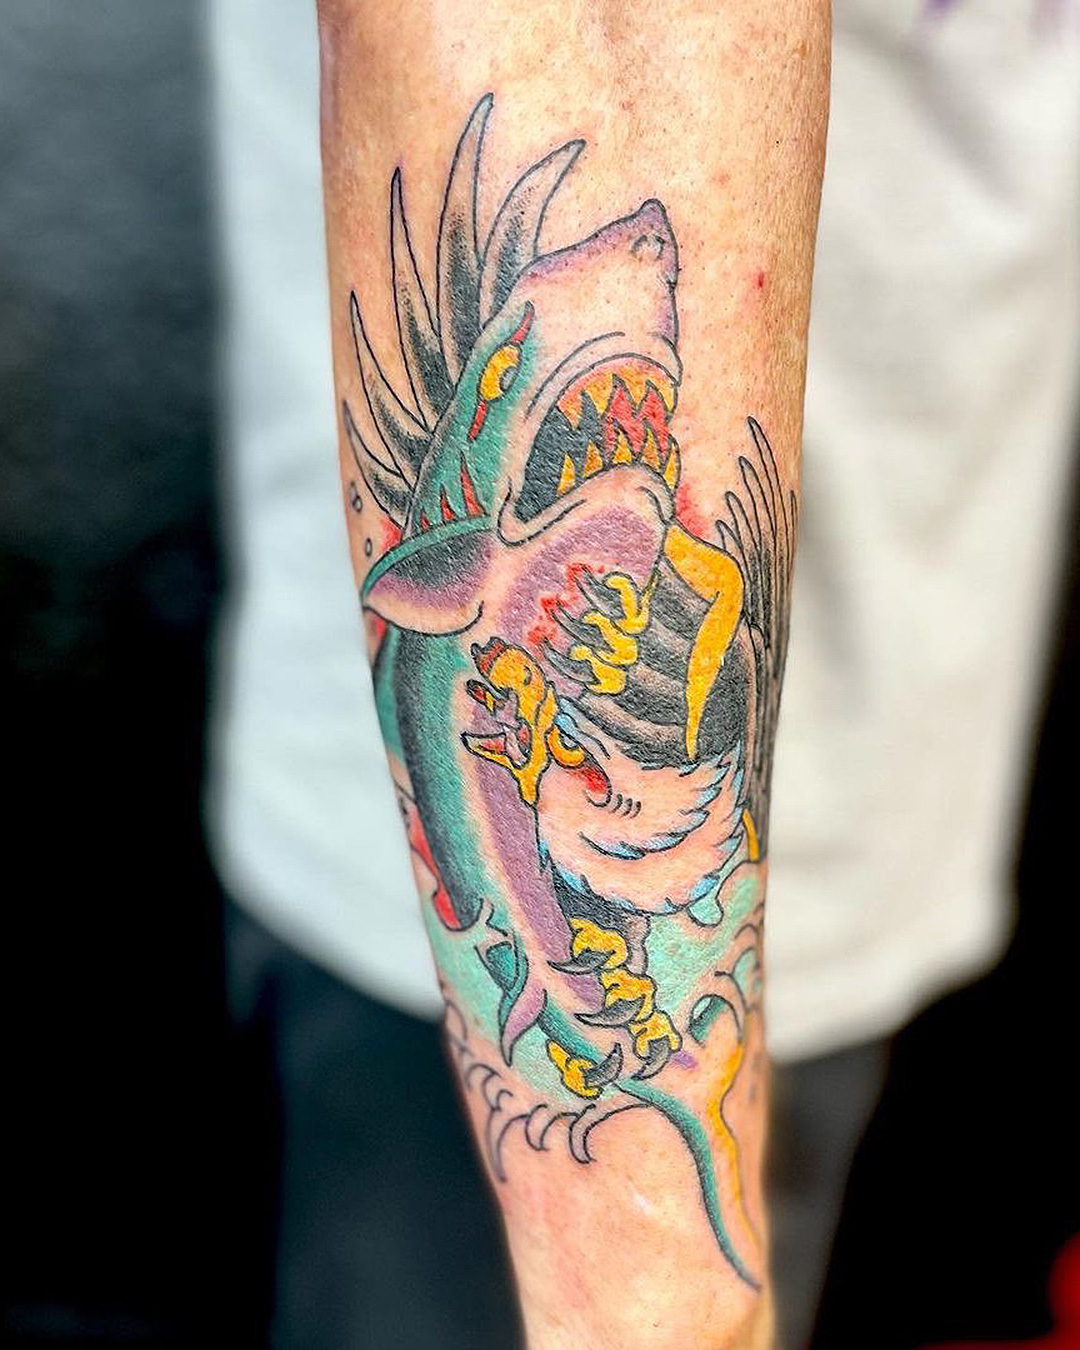 An eagle faces off with a shark in this tattoo from K'Road's tattooed heart.